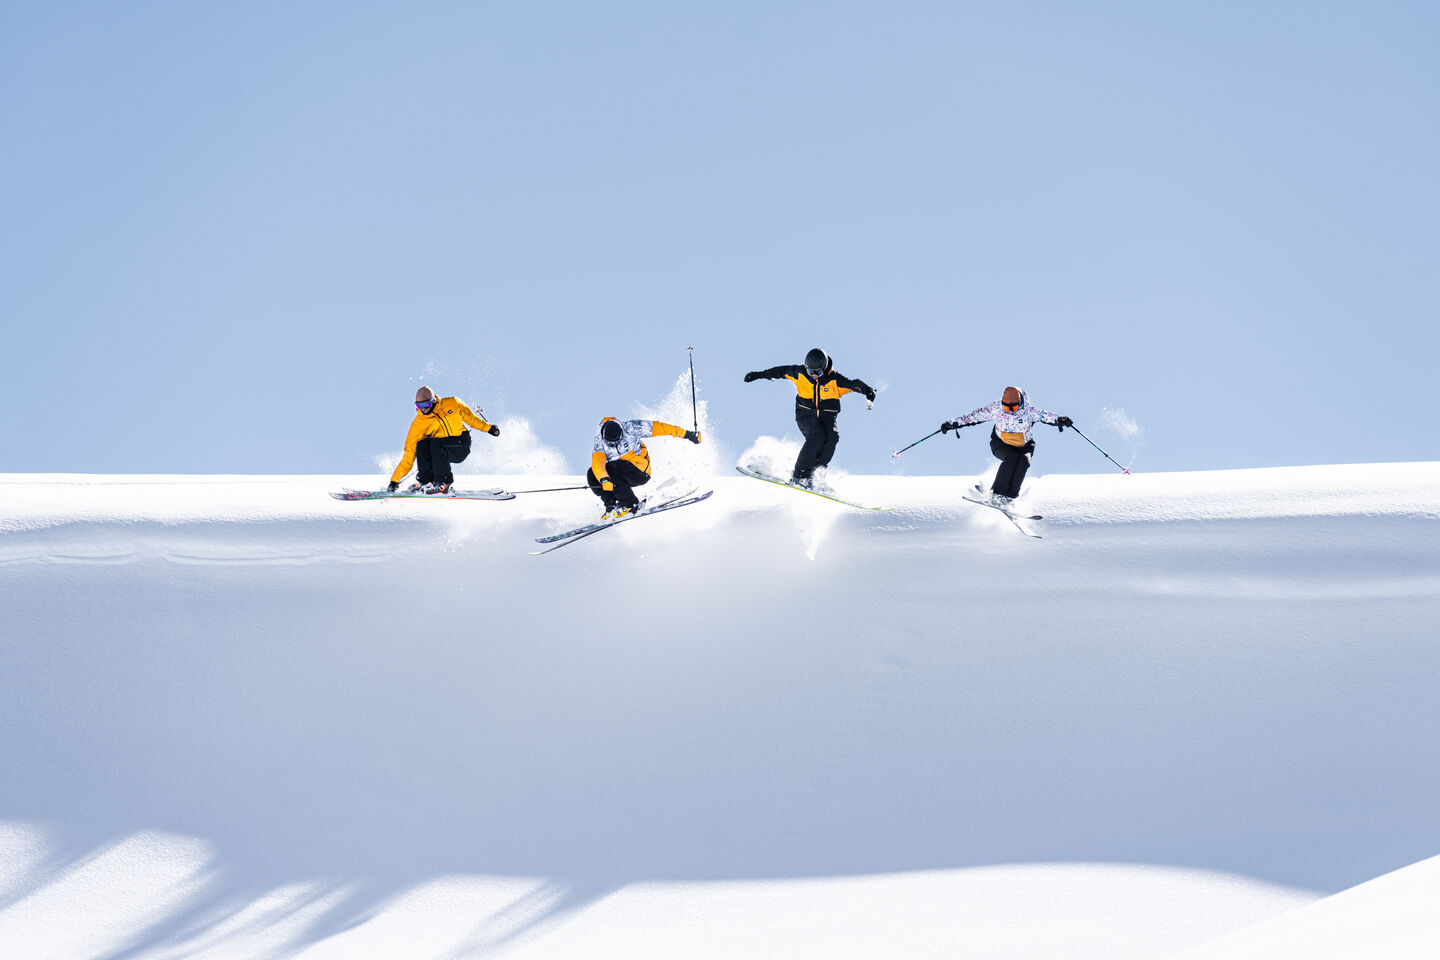 4 skiers jumping over a hill at the same time